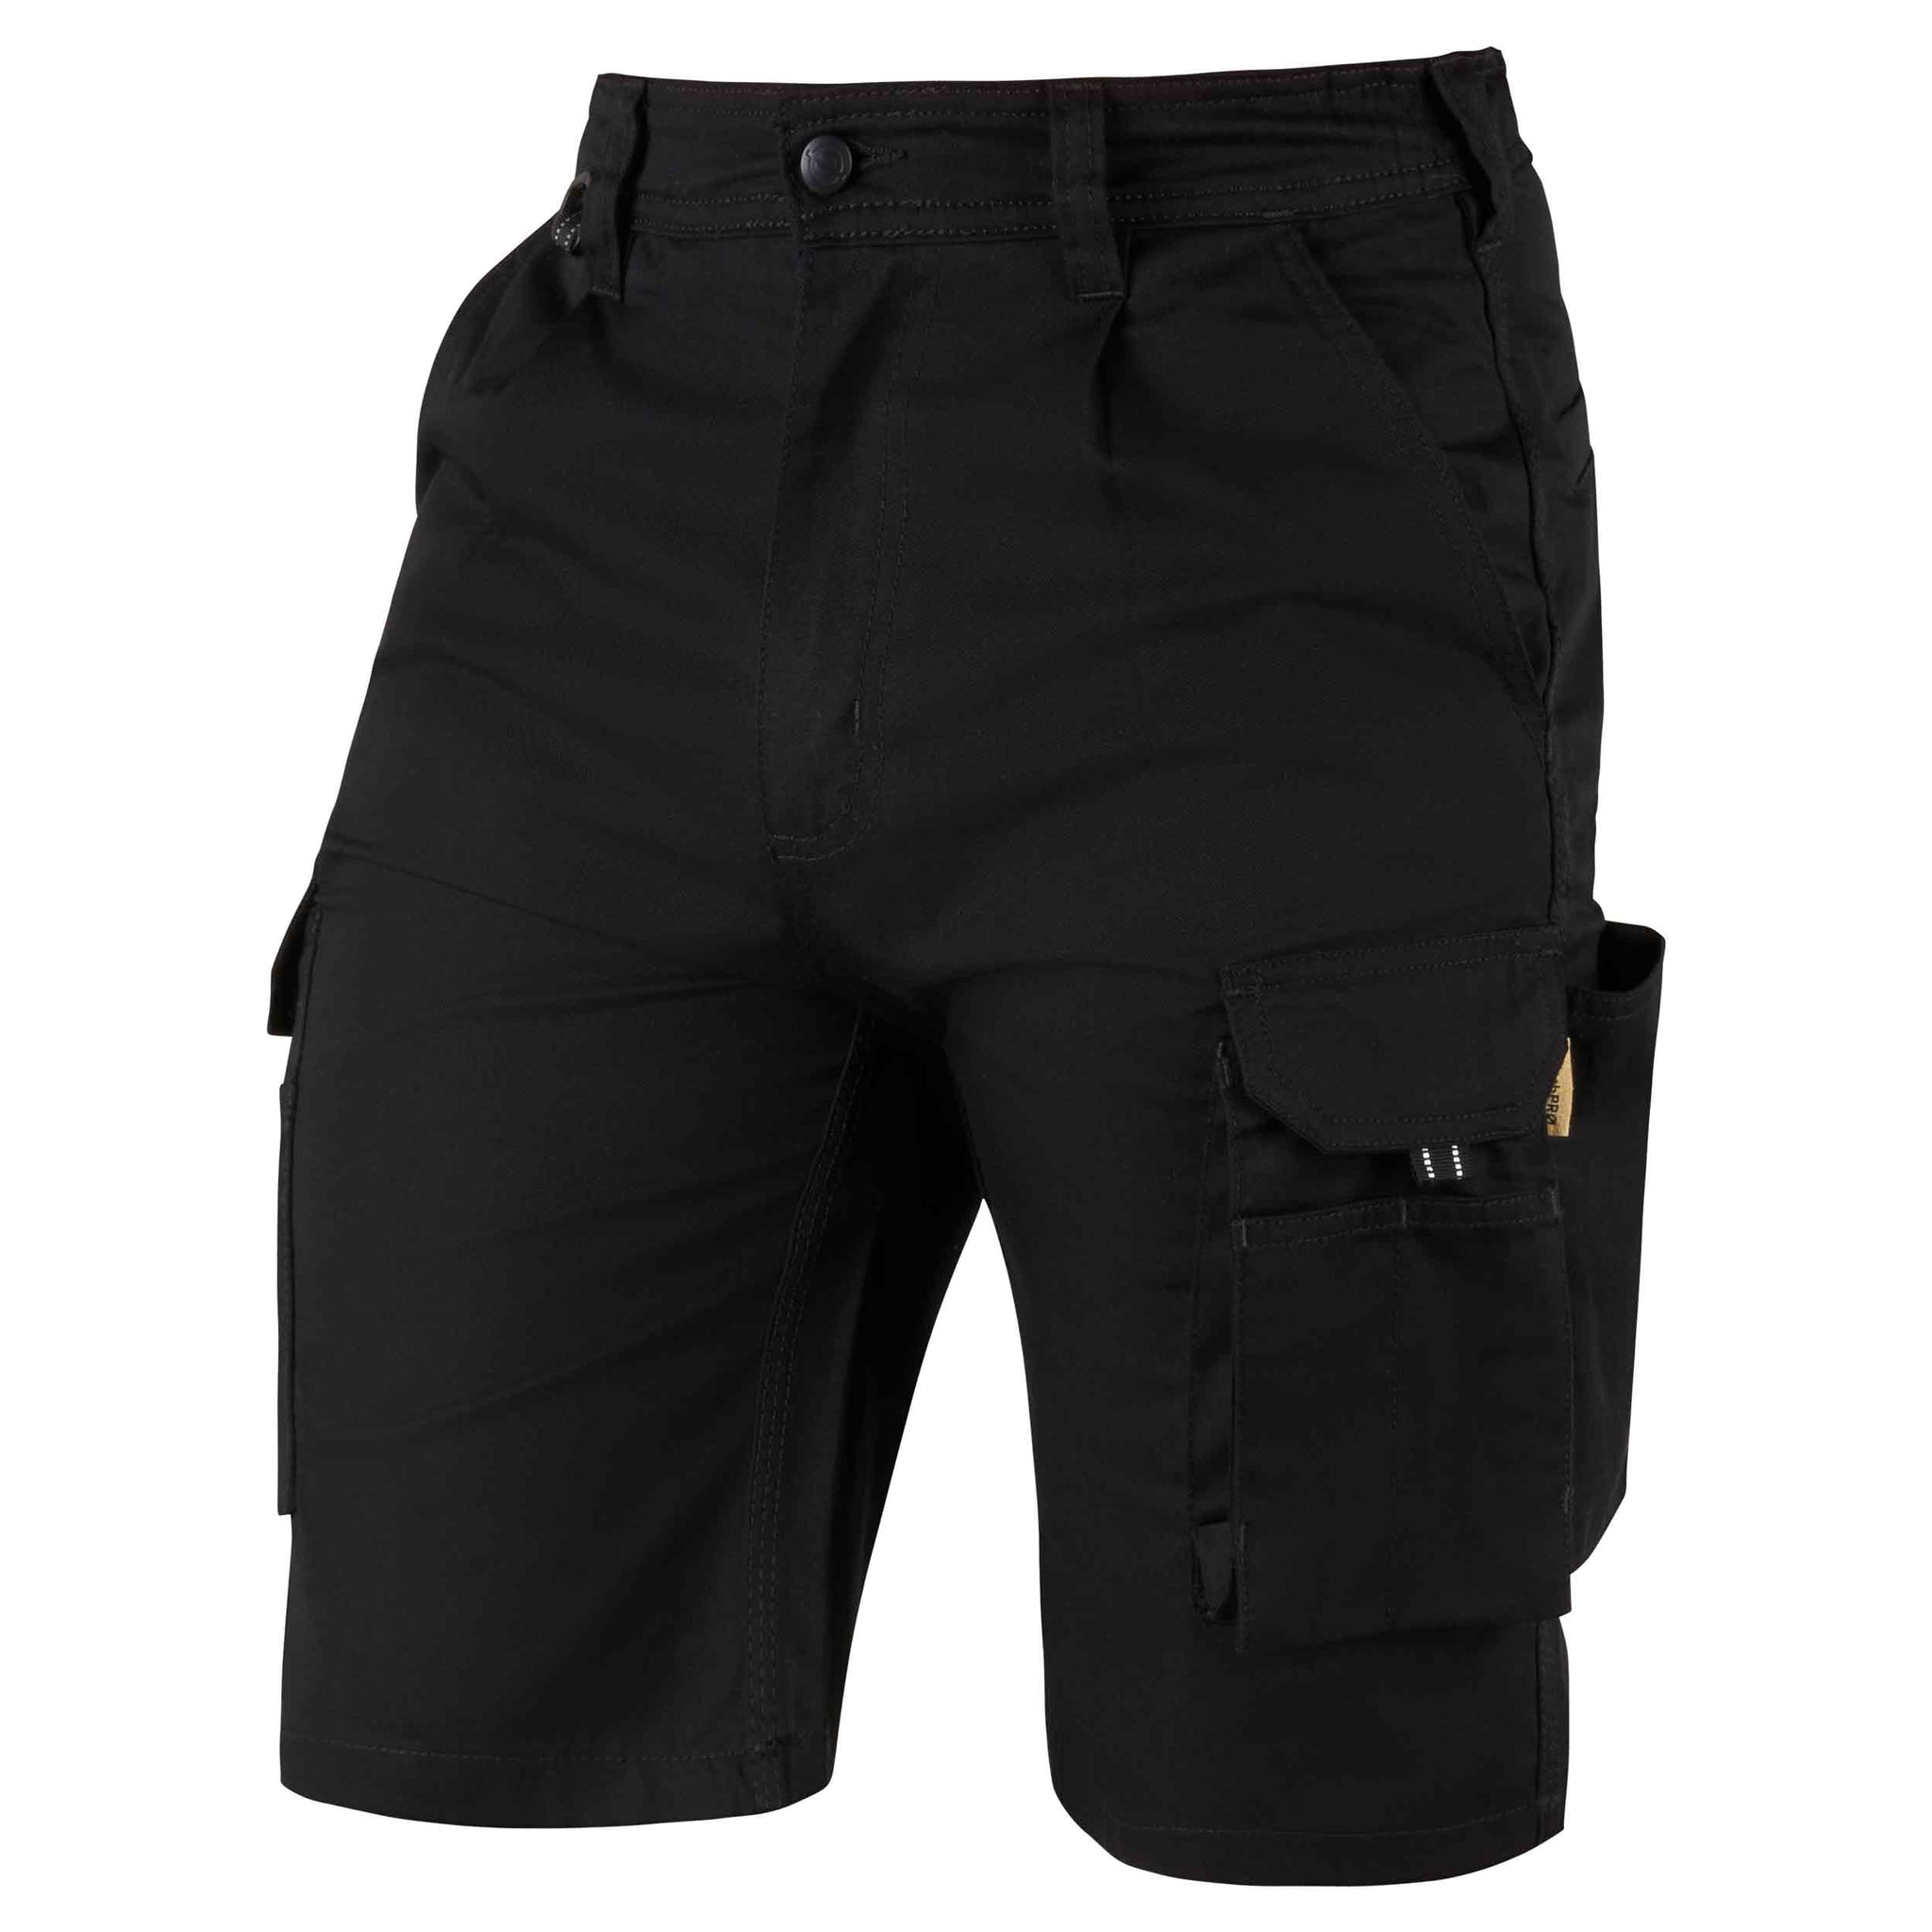 Hawk Shorts EarthPro® / 65% recycletes Polyester - 35% Baumwolle /  28"-52" / 2 Farben